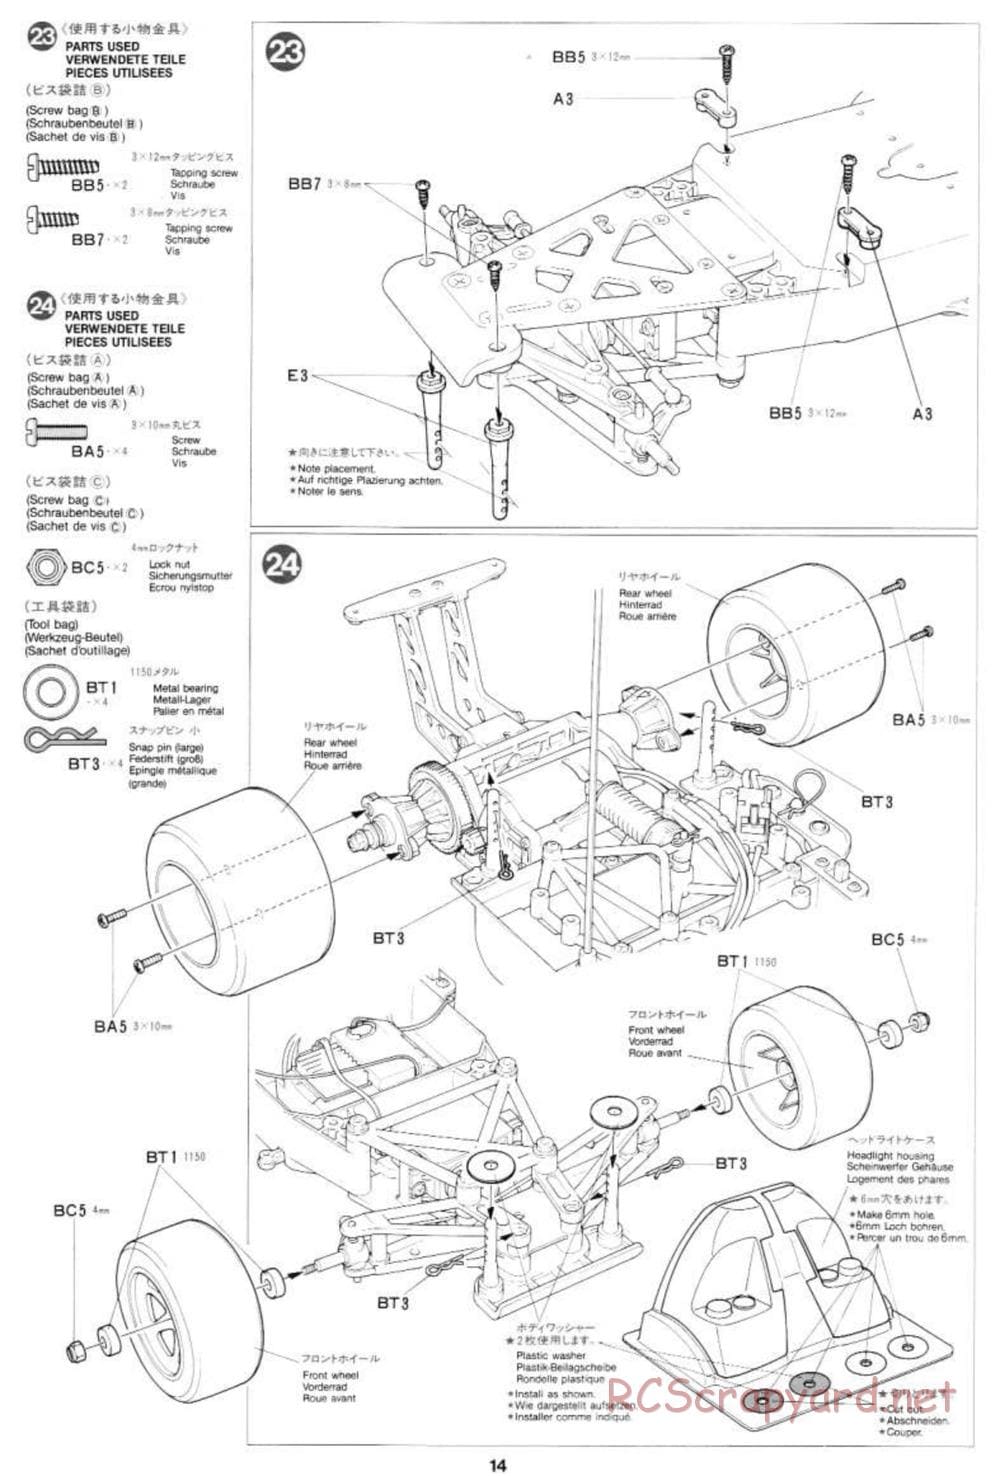 Tamiya - Mercedes-Benz C11 - Group-C Chassis - Manual - Page 14